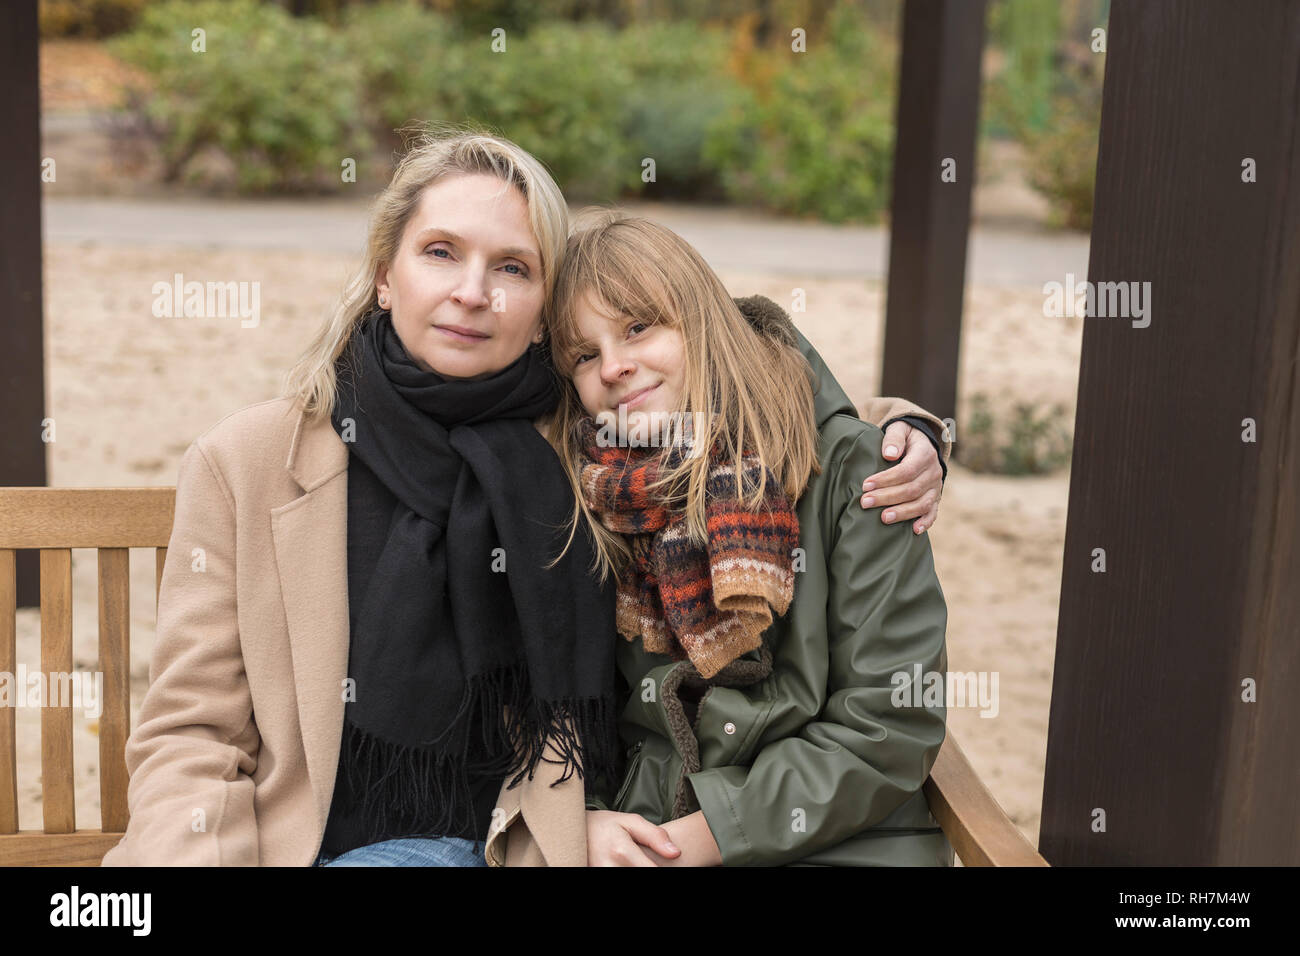 Portrait affectionate mother and daughter hugging on park bench Stock Photo